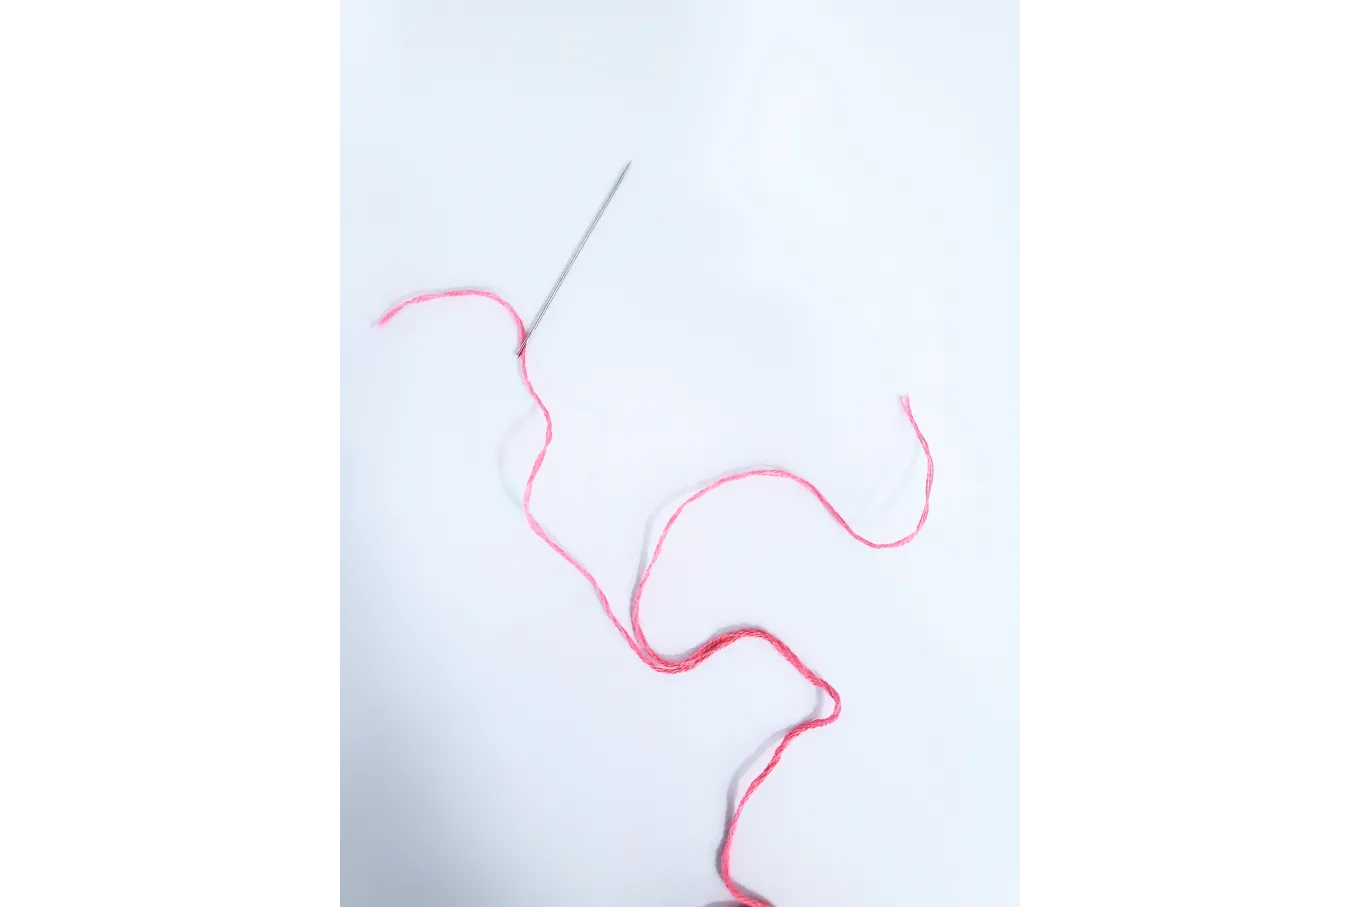 Pink embroidery floss split in half for needlework